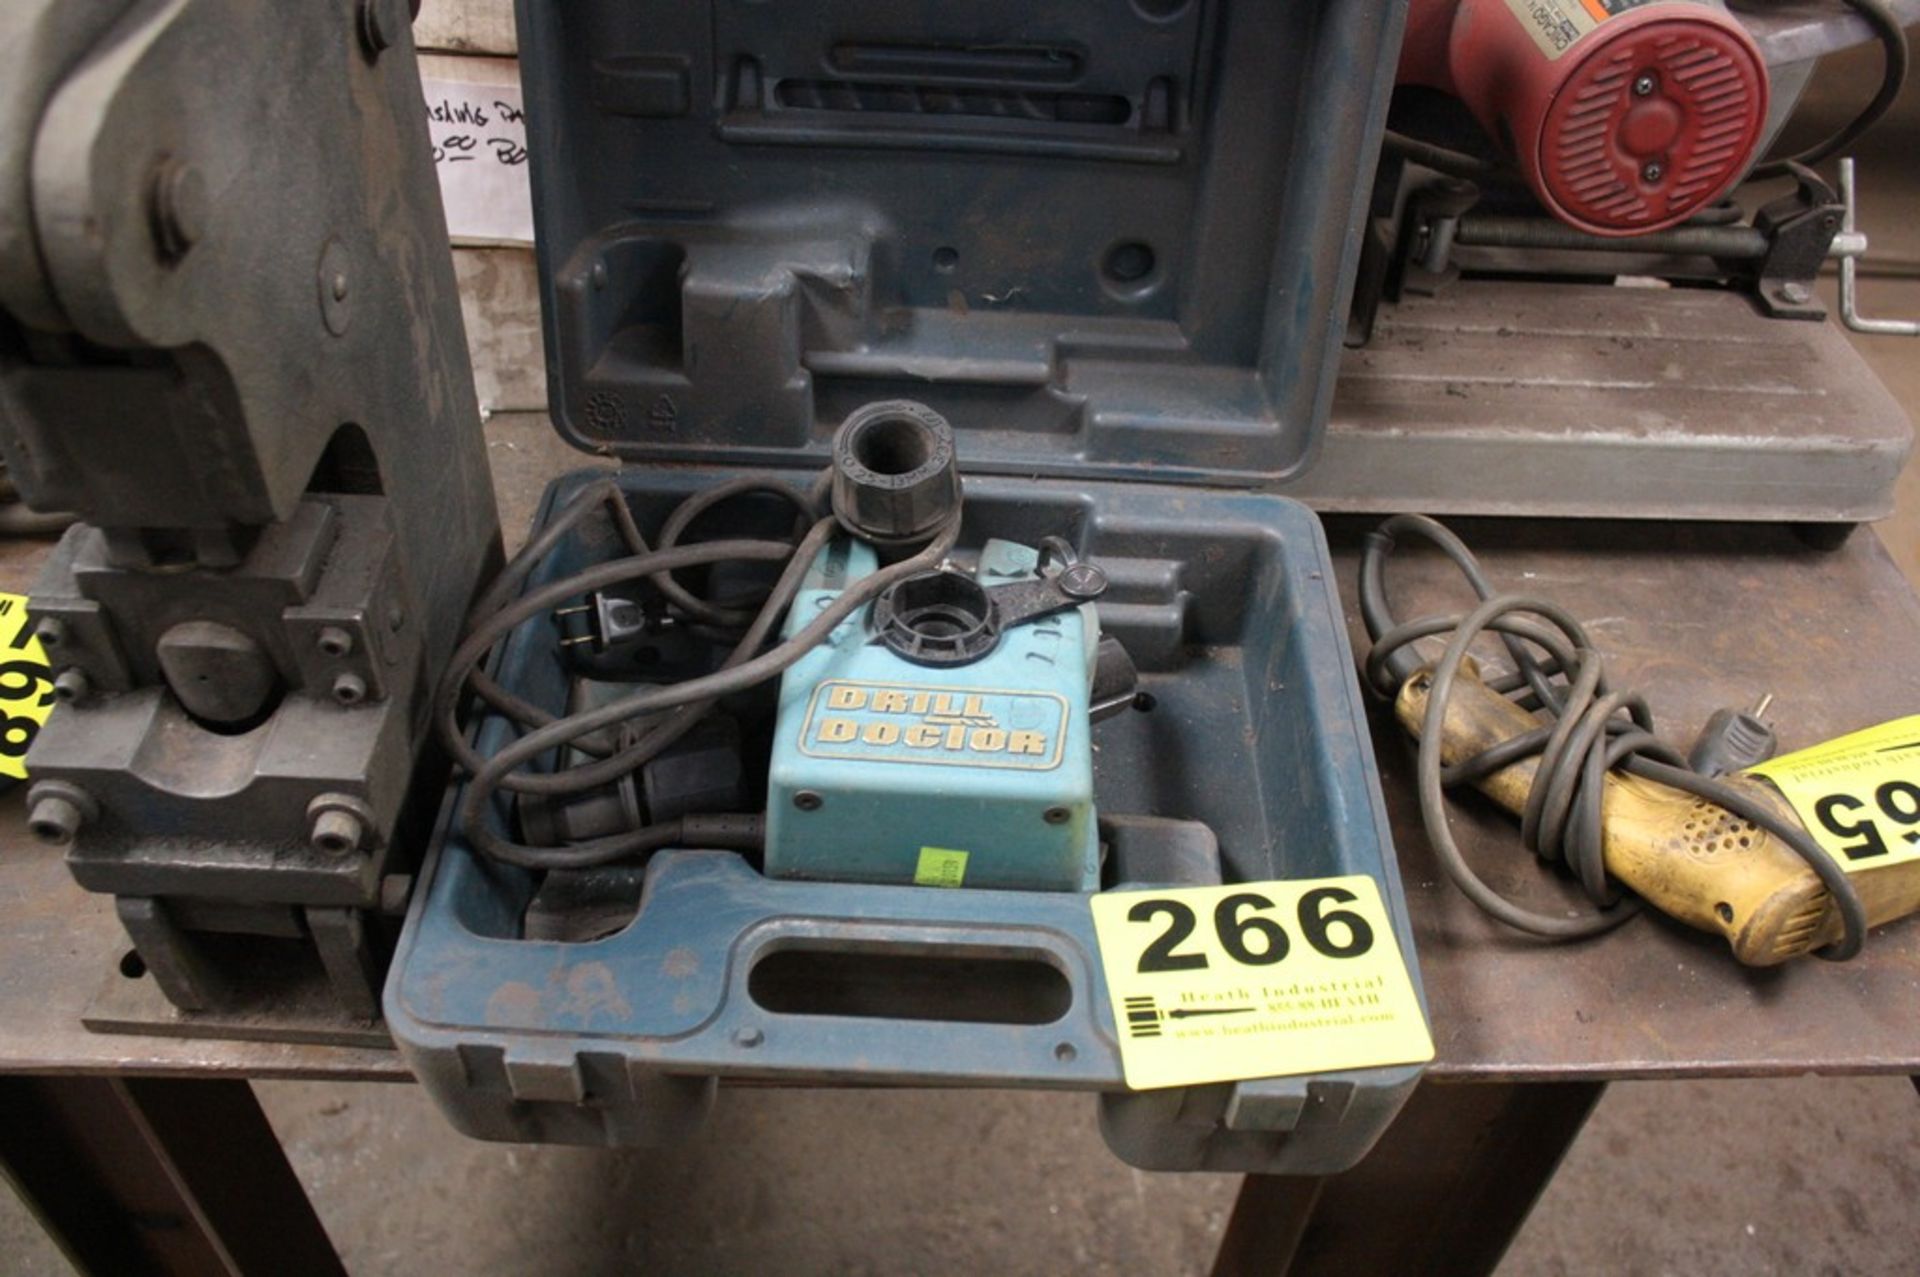 DRILL DOCTOR DRILL BIT SHARPENER WITH CASE